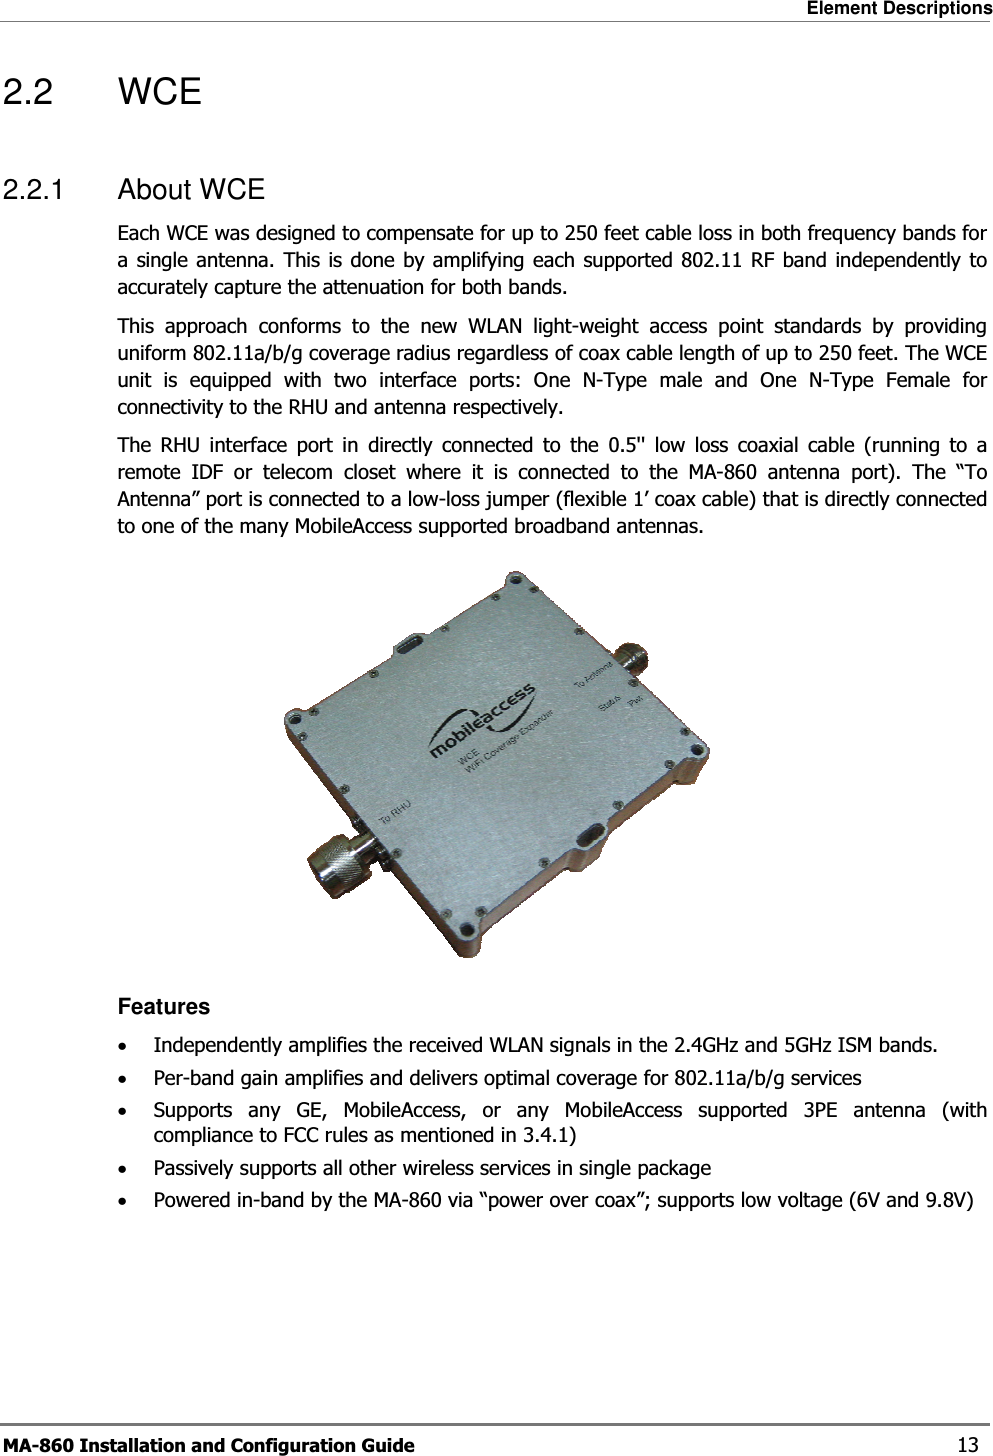 Element Descriptions MA-860 Installation and Configuration Guide    13 2.2 WCE 2.2.1 About WCE Each WCE was designed to compensate for up to 250 feet cable loss in both frequency bands for a single antenna. This is done by amplifying each supported 802.11 RF band independently to accurately capture the attenuation for both bands.  This approach conforms to the new WLAN light-weight access point standards by providing uniform 802.11a/b/g coverage radius regardless of coax cable length of up to 250 feet. The WCE unit is equipped with two interface ports: One N-Type male and One N-Type Female for connectivity to the RHU and antenna respectively.  The RHU interface port in directly connected to the 0.5&apos;&apos; low loss coaxial cable (running to a remote IDF or telecom closet where it is connected to the MA-860 antenna port). The “To Antenna” port is connected to a low-loss jumper (flexible 1’ coax cable) that is directly connected to one of the many MobileAccess supported broadband antennas.  Features •Independently amplifies the received WLAN signals in the 2.4GHz and 5GHz ISM bands. •Per-band gain amplifies and delivers optimal coverage for 802.11a/b/g services •Supports any GE, MobileAccess, or any MobileAccess supported 3PE antenna (with compliance to FCC rules as mentioned in 3.4.1) •Passively supports all other wireless services in single package  •Powered in-band by the MA-860 via “power over coax”; supports low voltage (6V and 9.8V) 